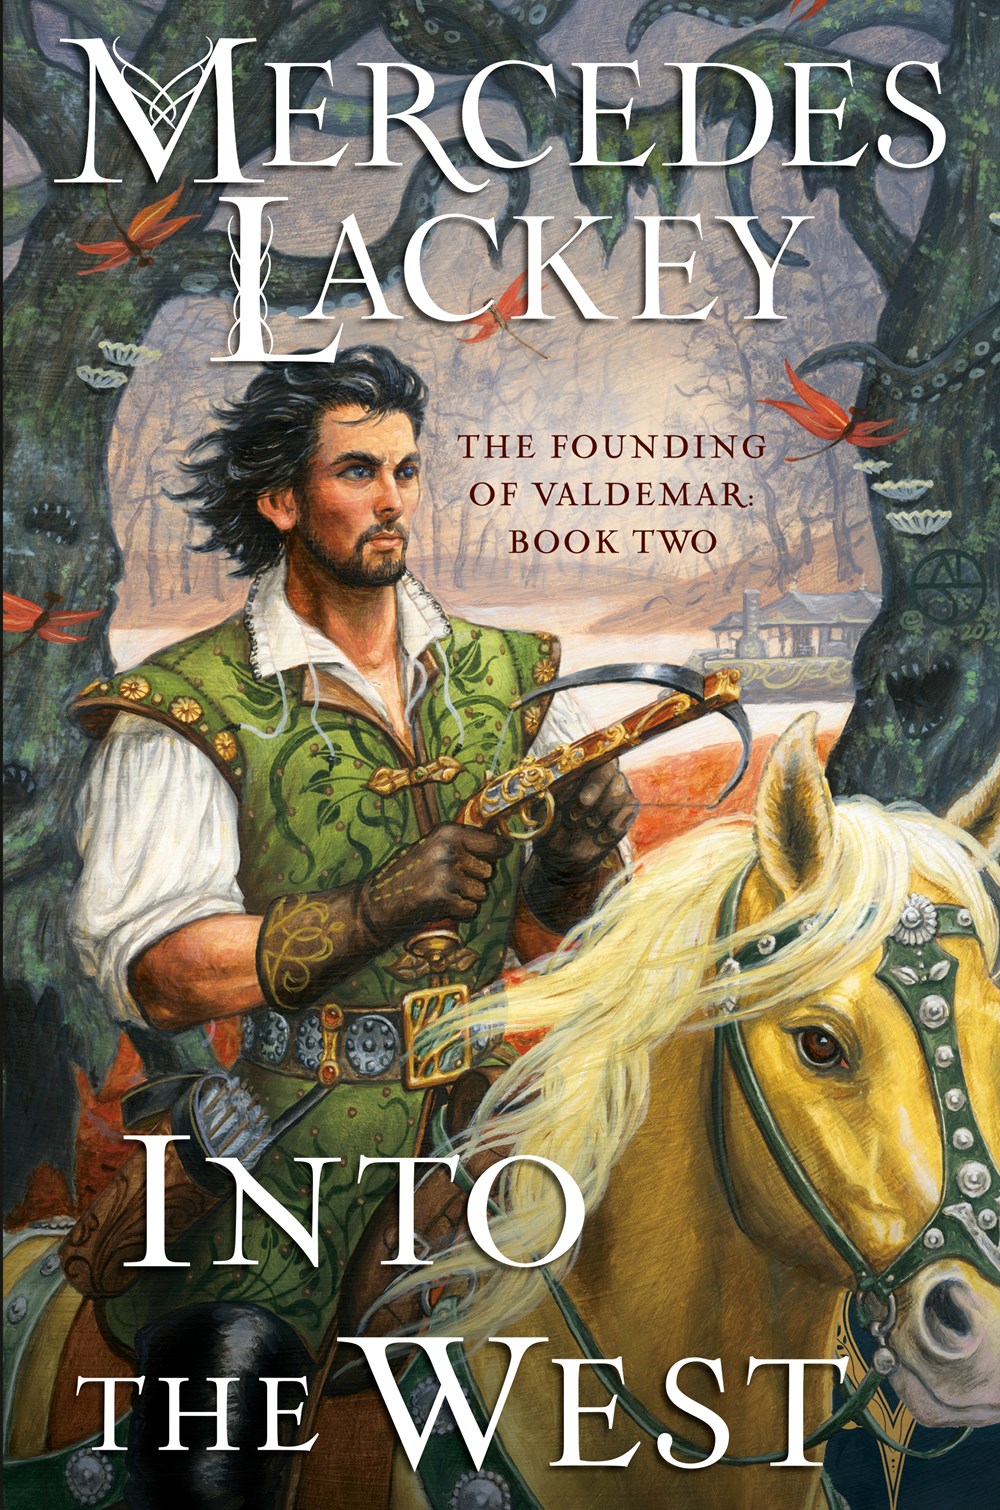 Read-Alikes for 'Into the West' by Mercedes Lackey | LibraryReads